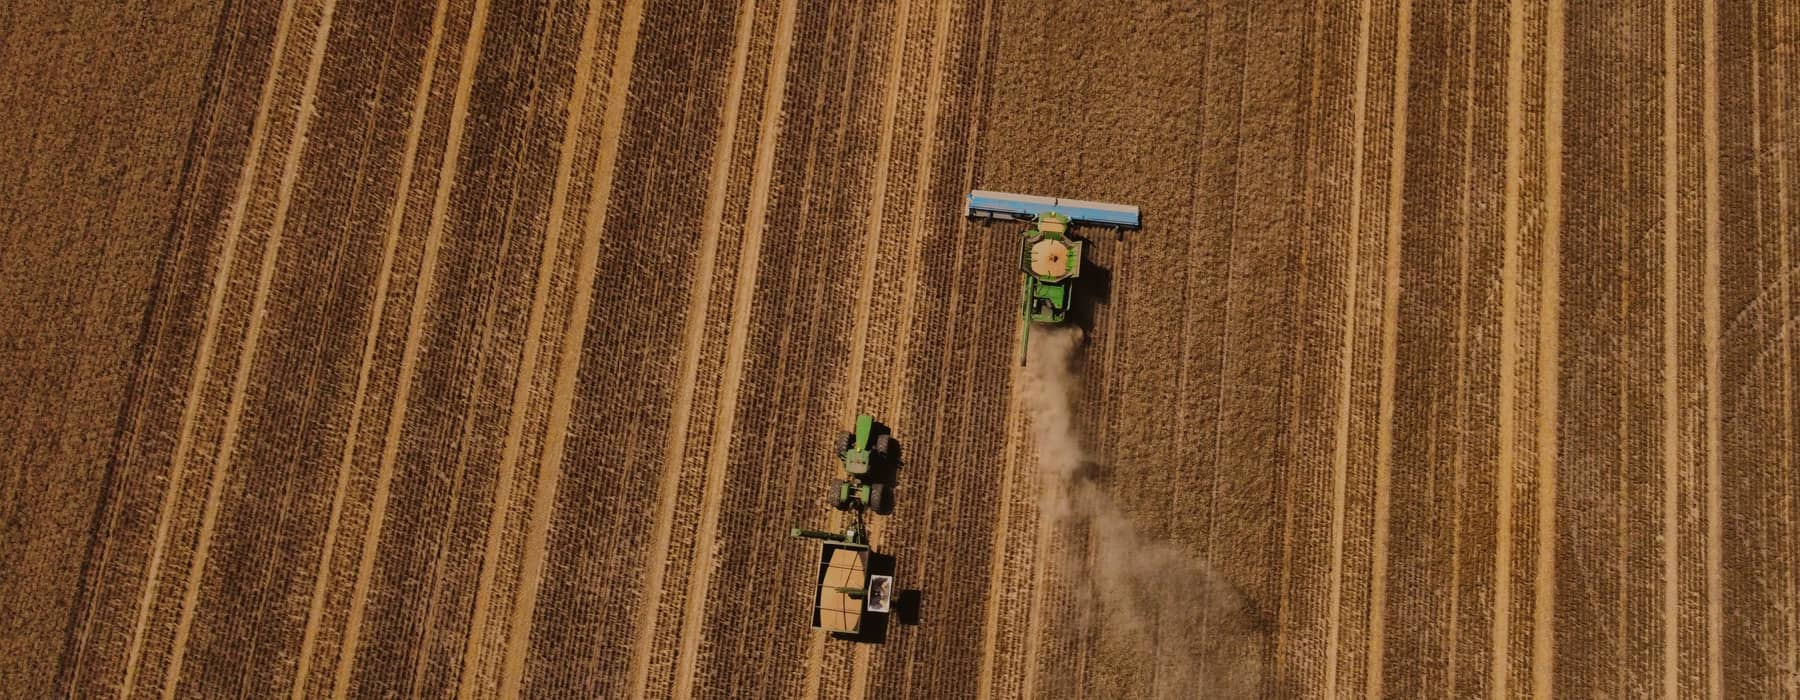 Bellata Gold wheat harvester aerial view from above